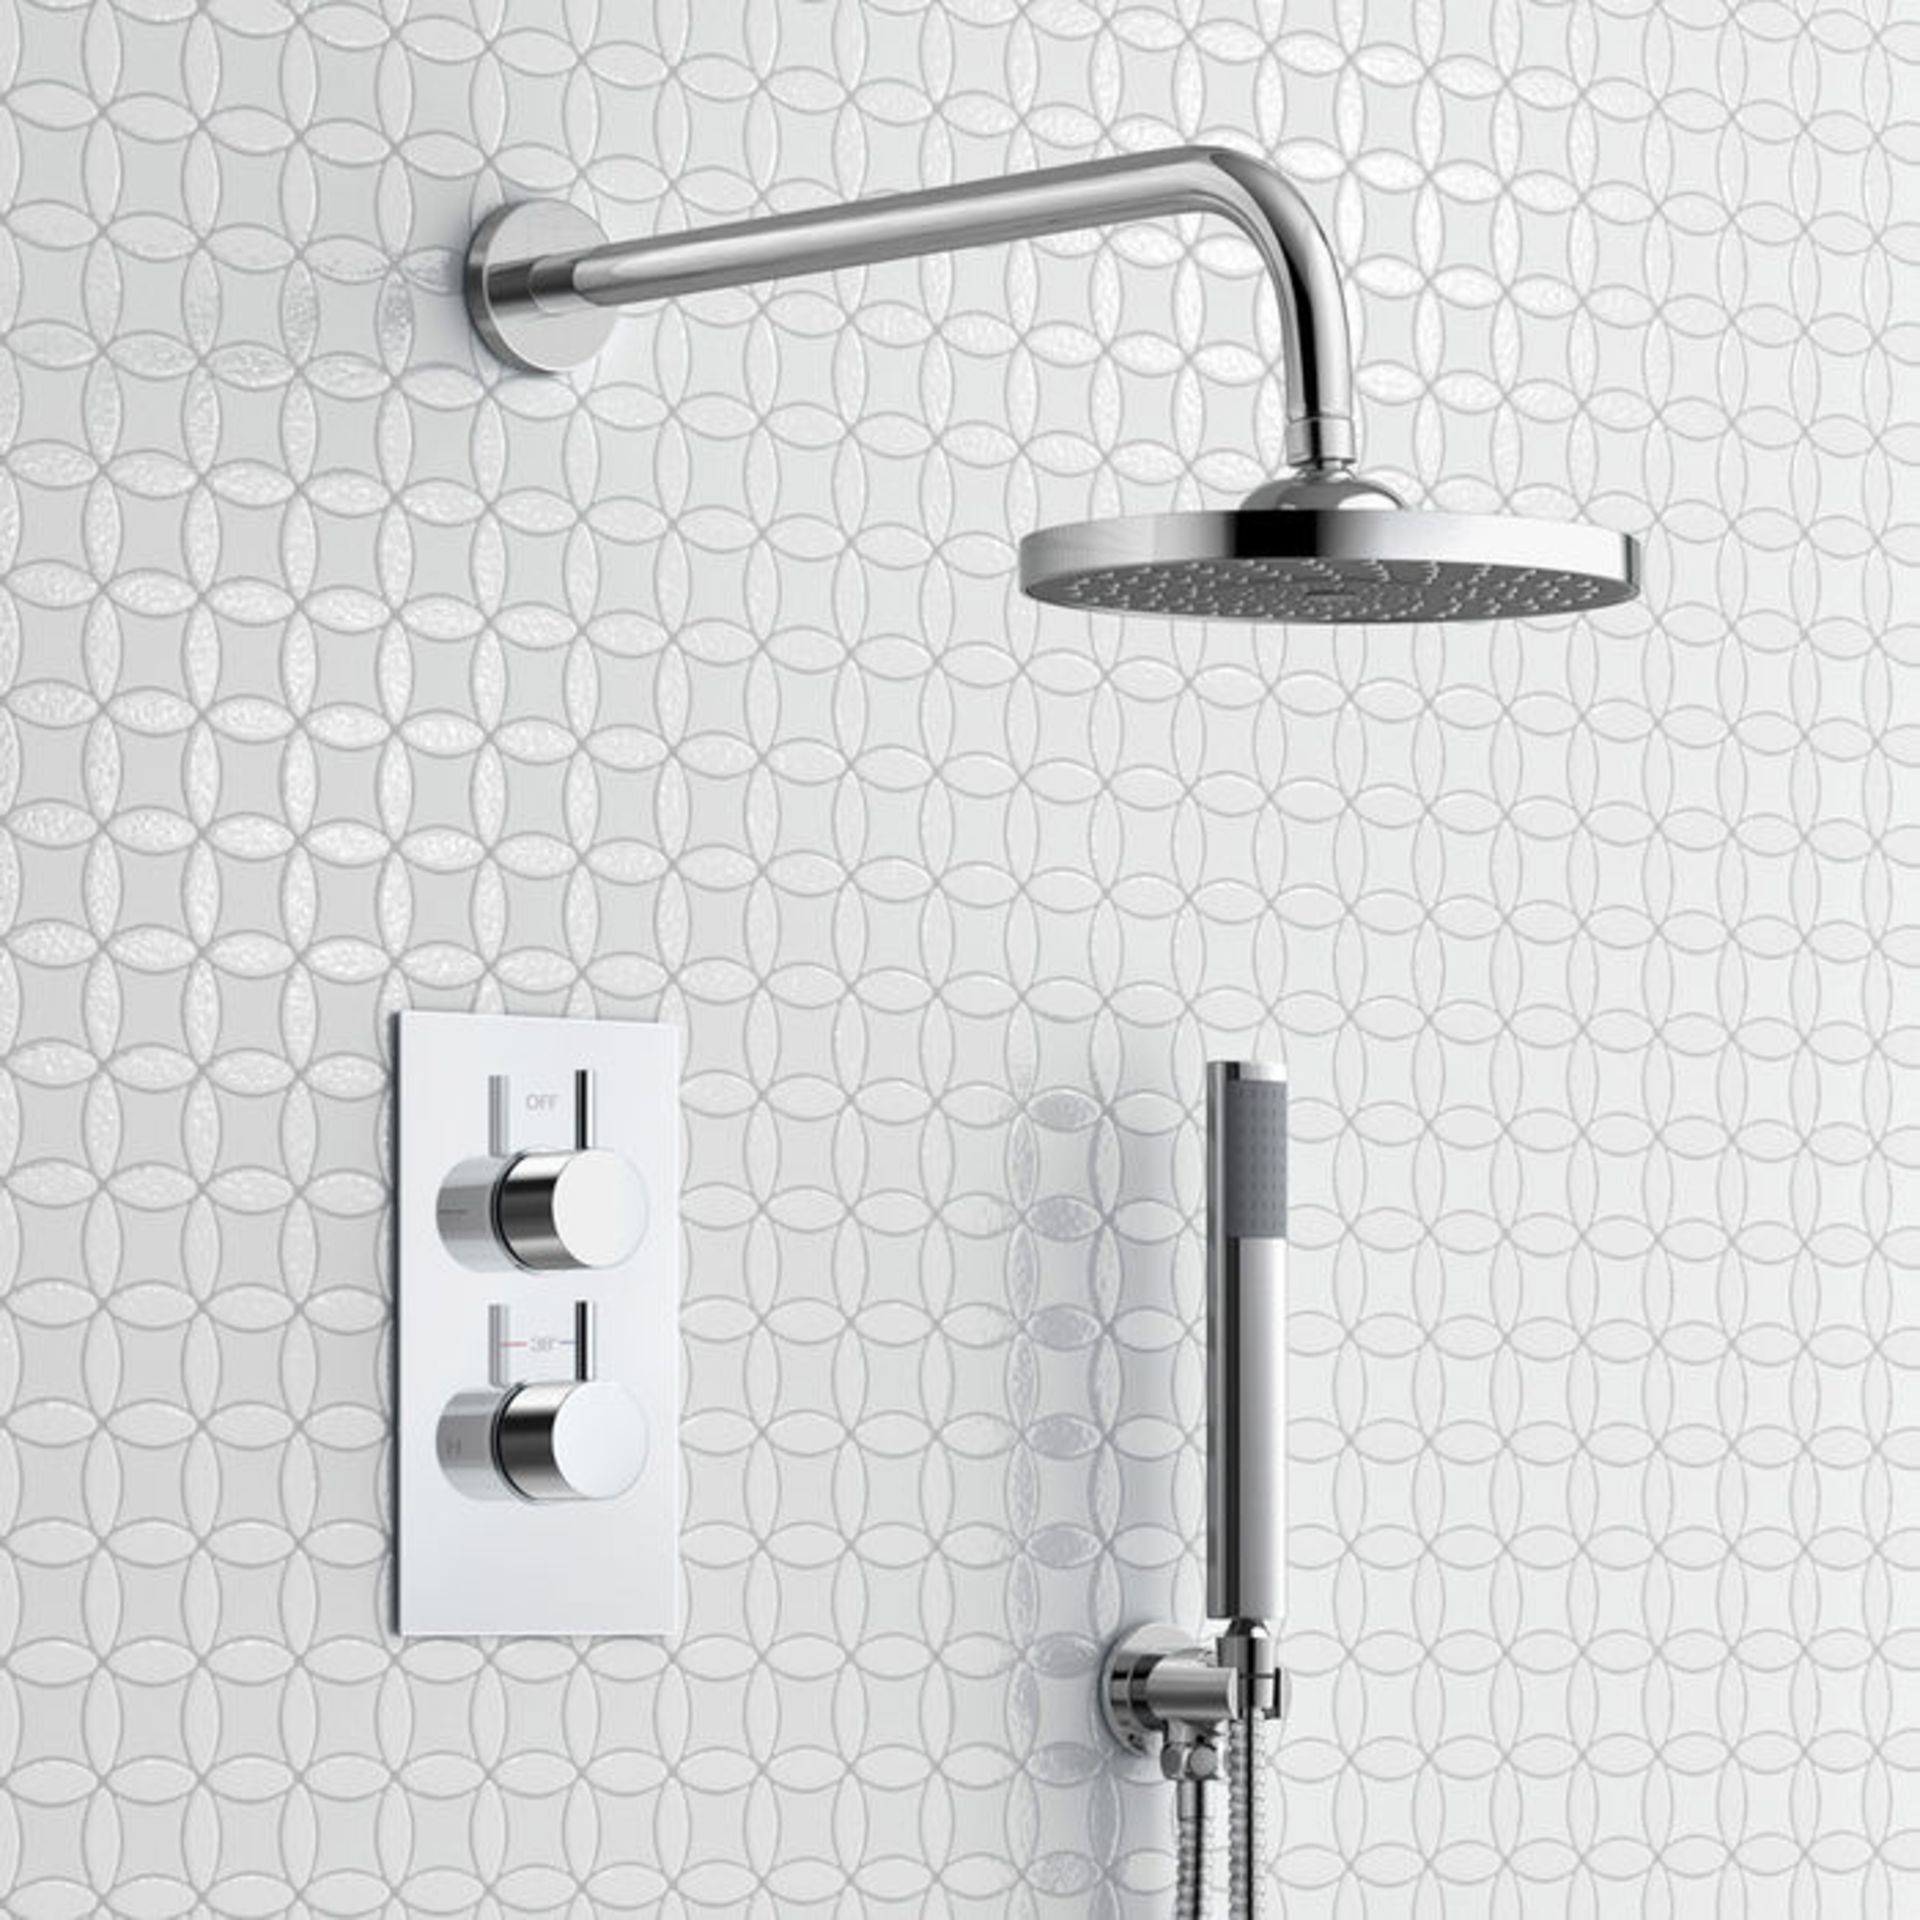 (XS47) Round Concealed Thermostatic Mixer Shower Kit & Medium Head. Family friendly detachable - Image 2 of 5